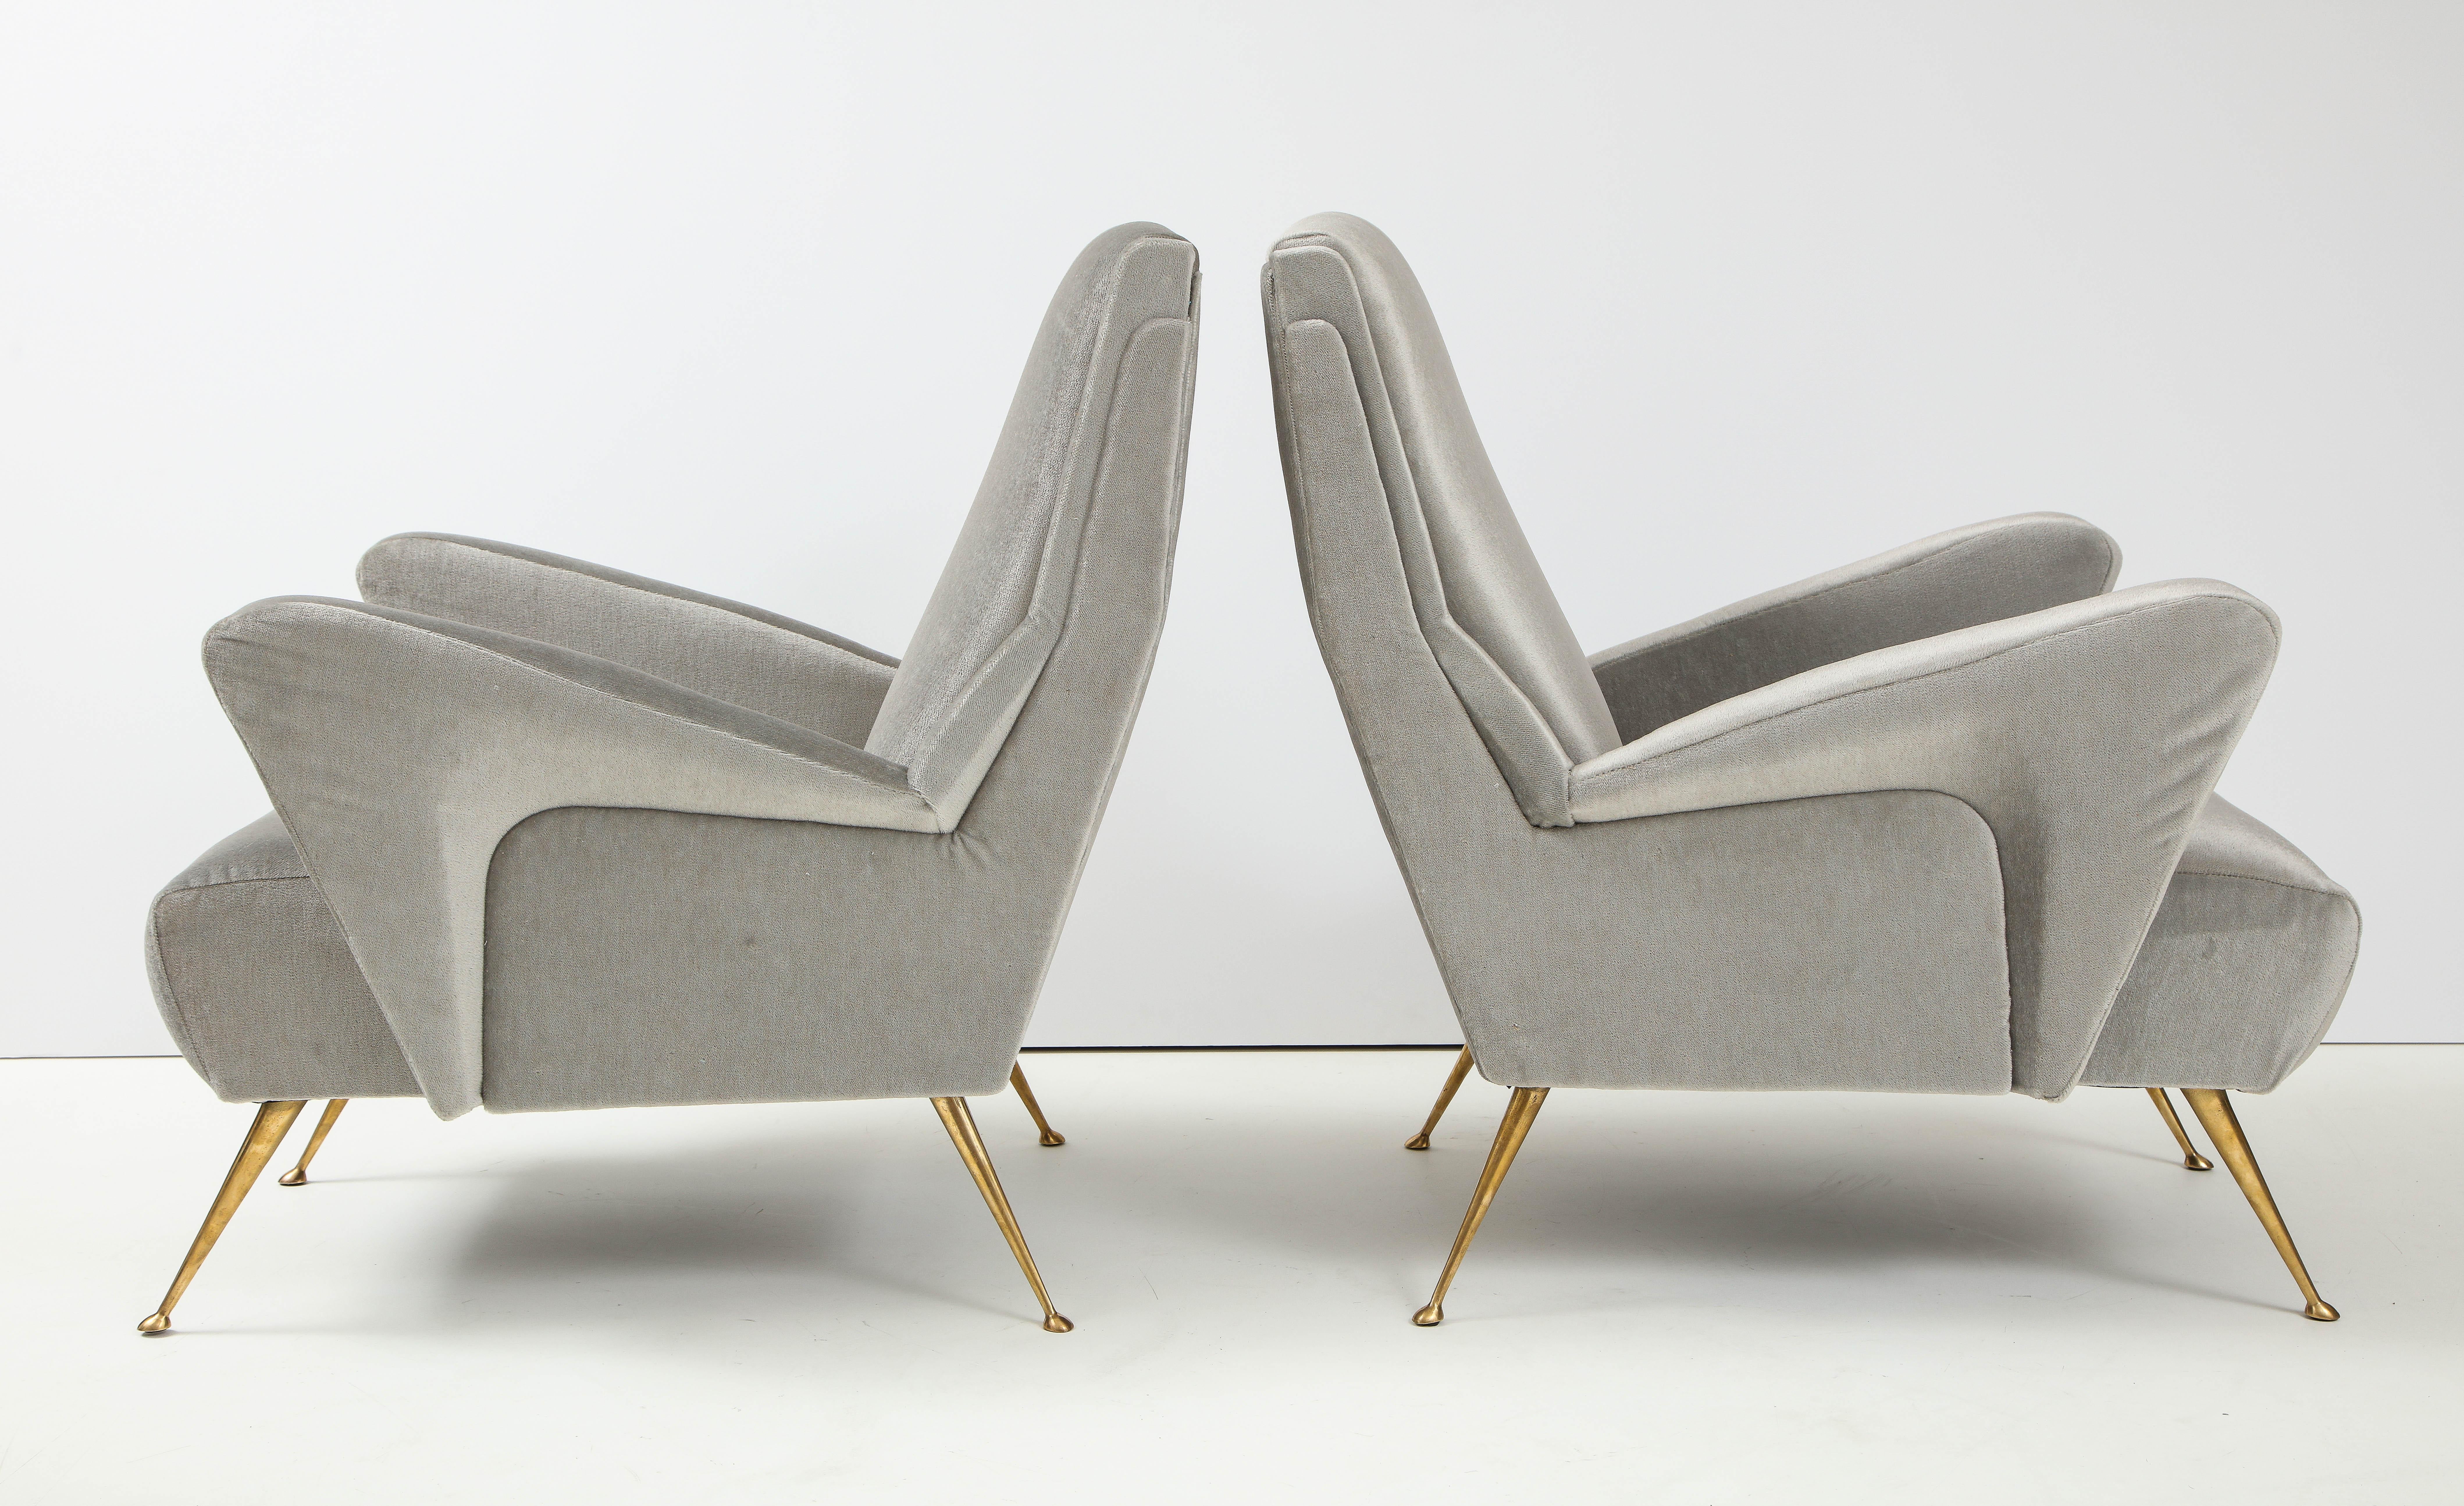 American 1950's Modernist Sculptural Italian Lounge Chairs with Solid Brass Legs